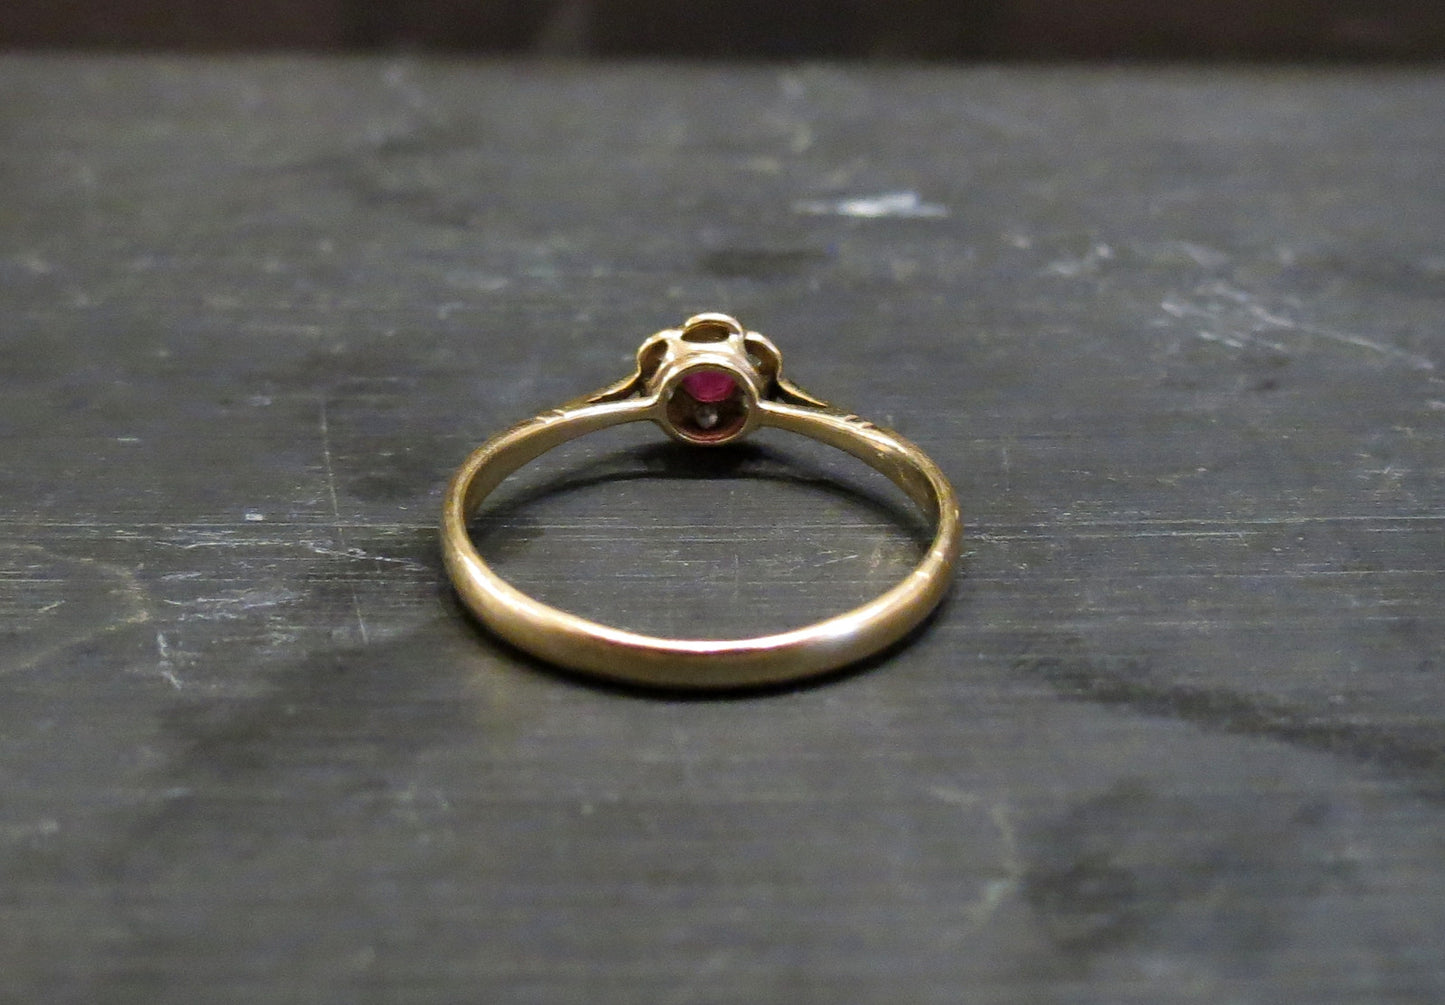 SOLD--Edwardian Ruby and Diamond Flower Ring Silver/18k c. 1900